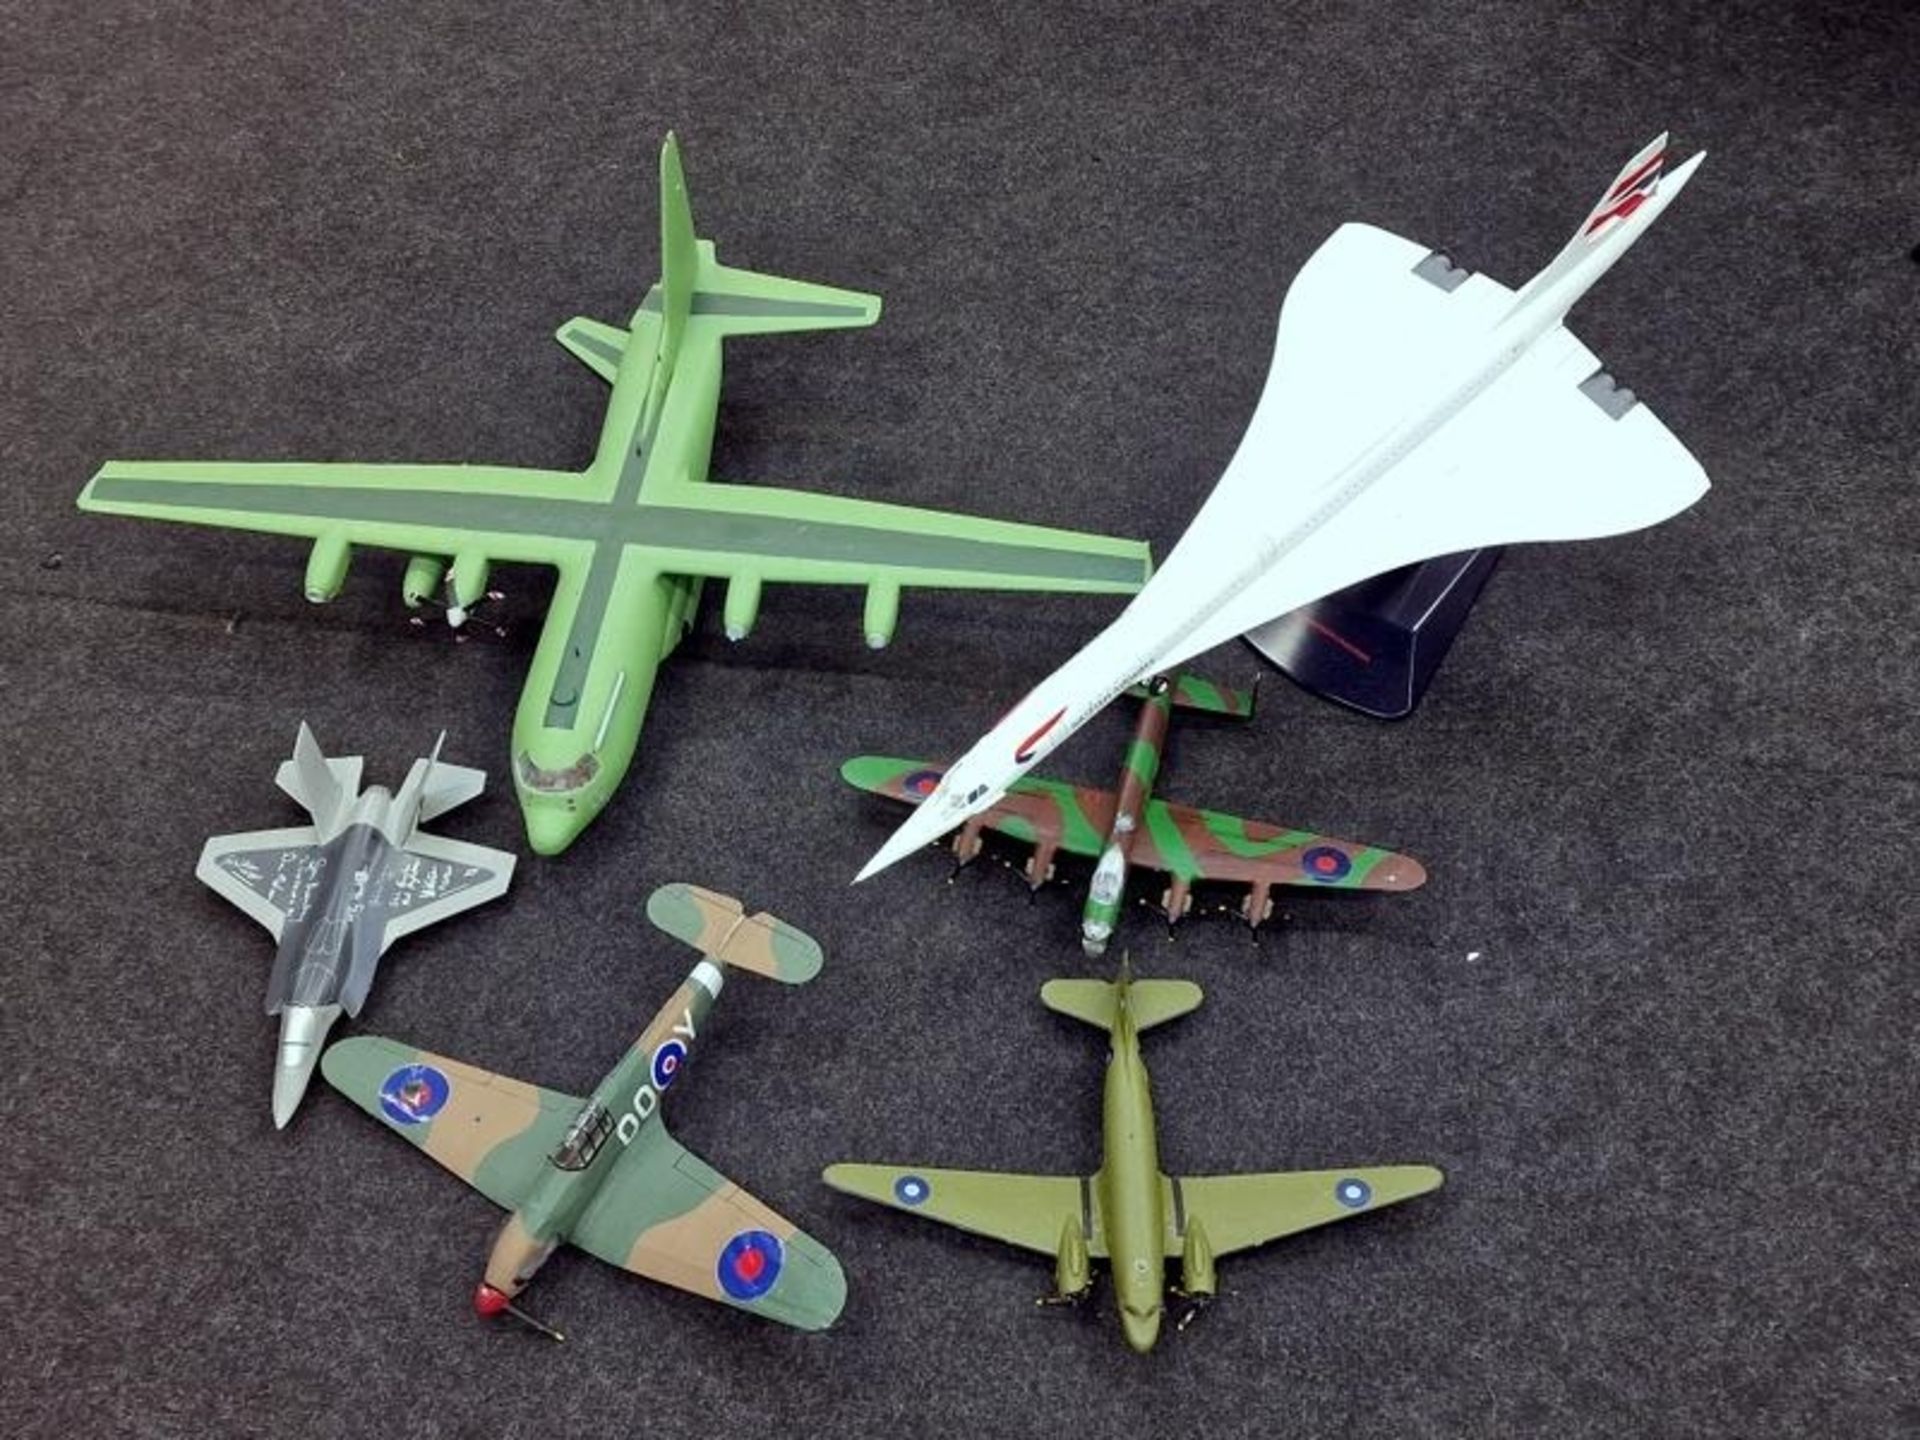 Collection of plastic models of aircraft to include British Airways Concorde.